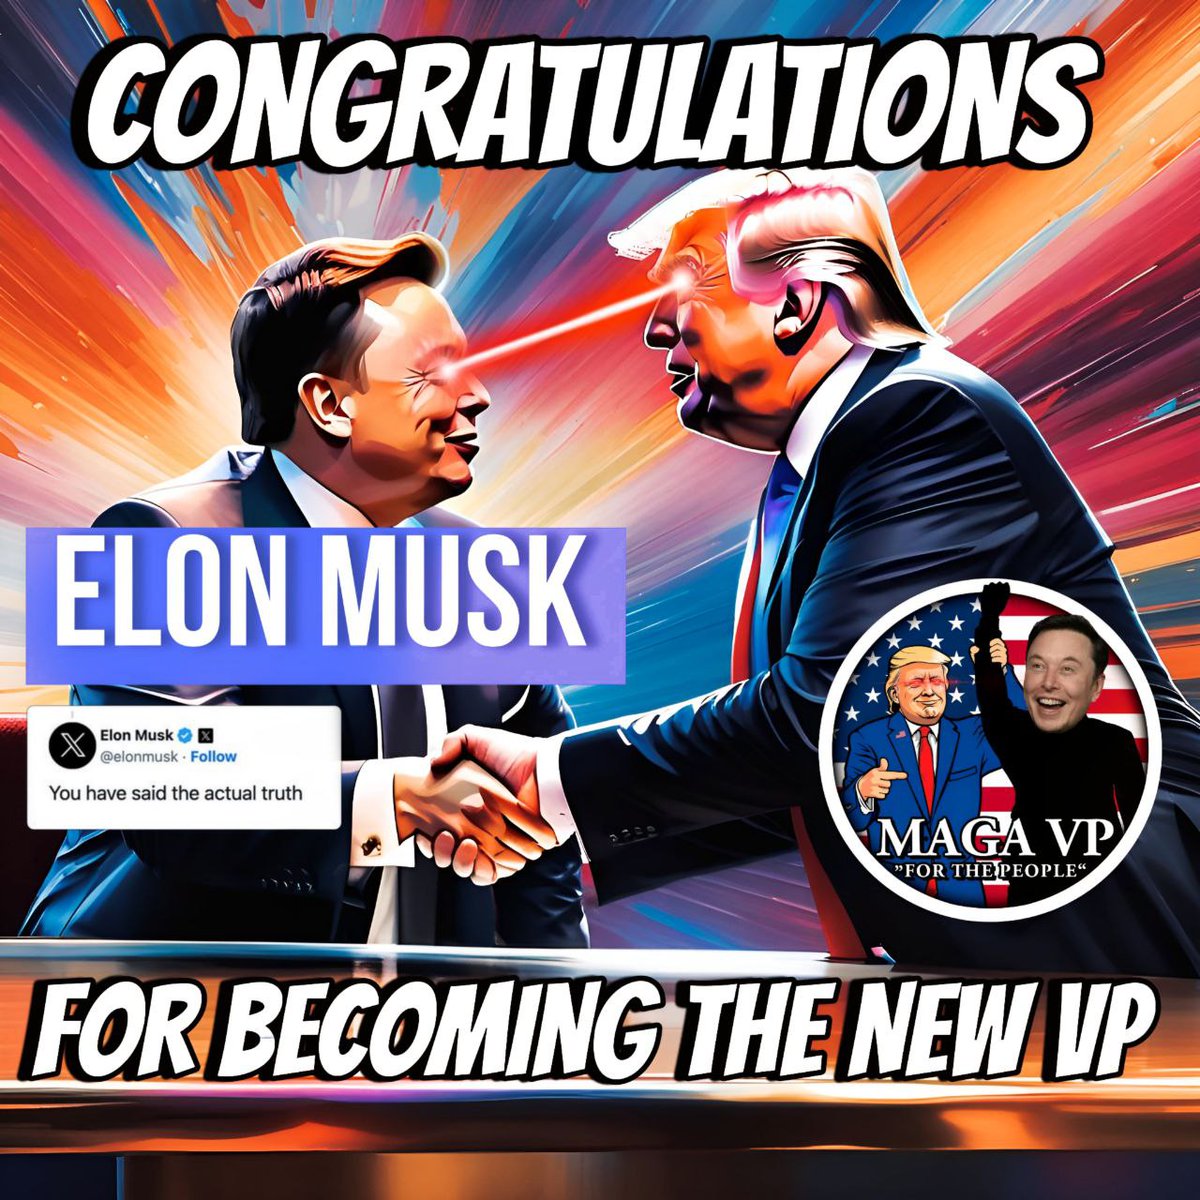 Day #18
Wauw, already 18 days.. @elonmusk we got you a special @DonaldTrump @magaVPcoin profilepicture for your @X account.